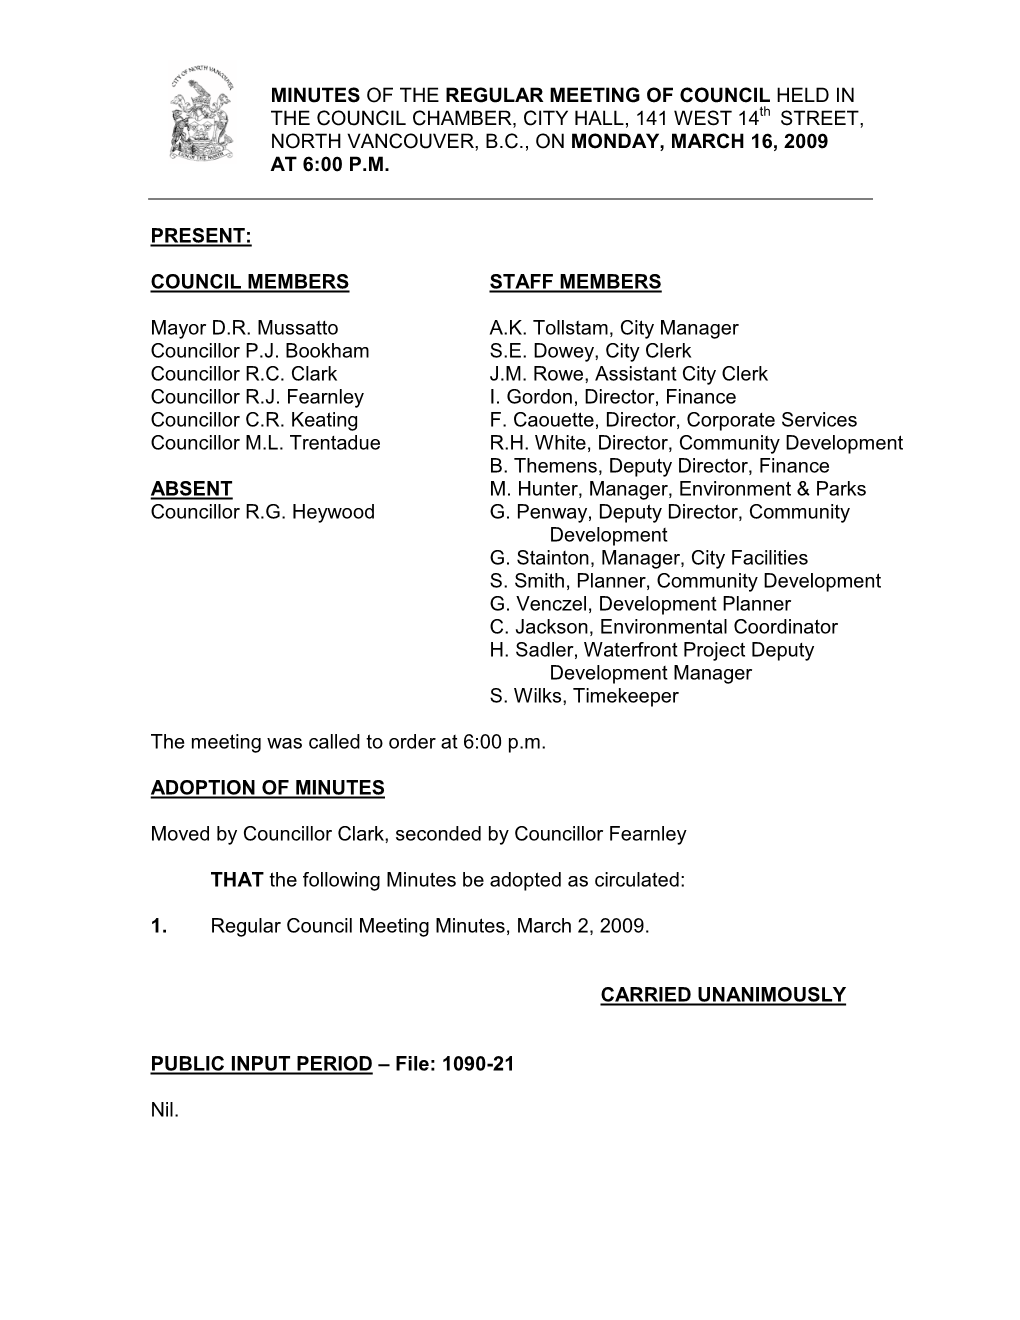 Regular Council Meeting Minutes, March 2, 2009